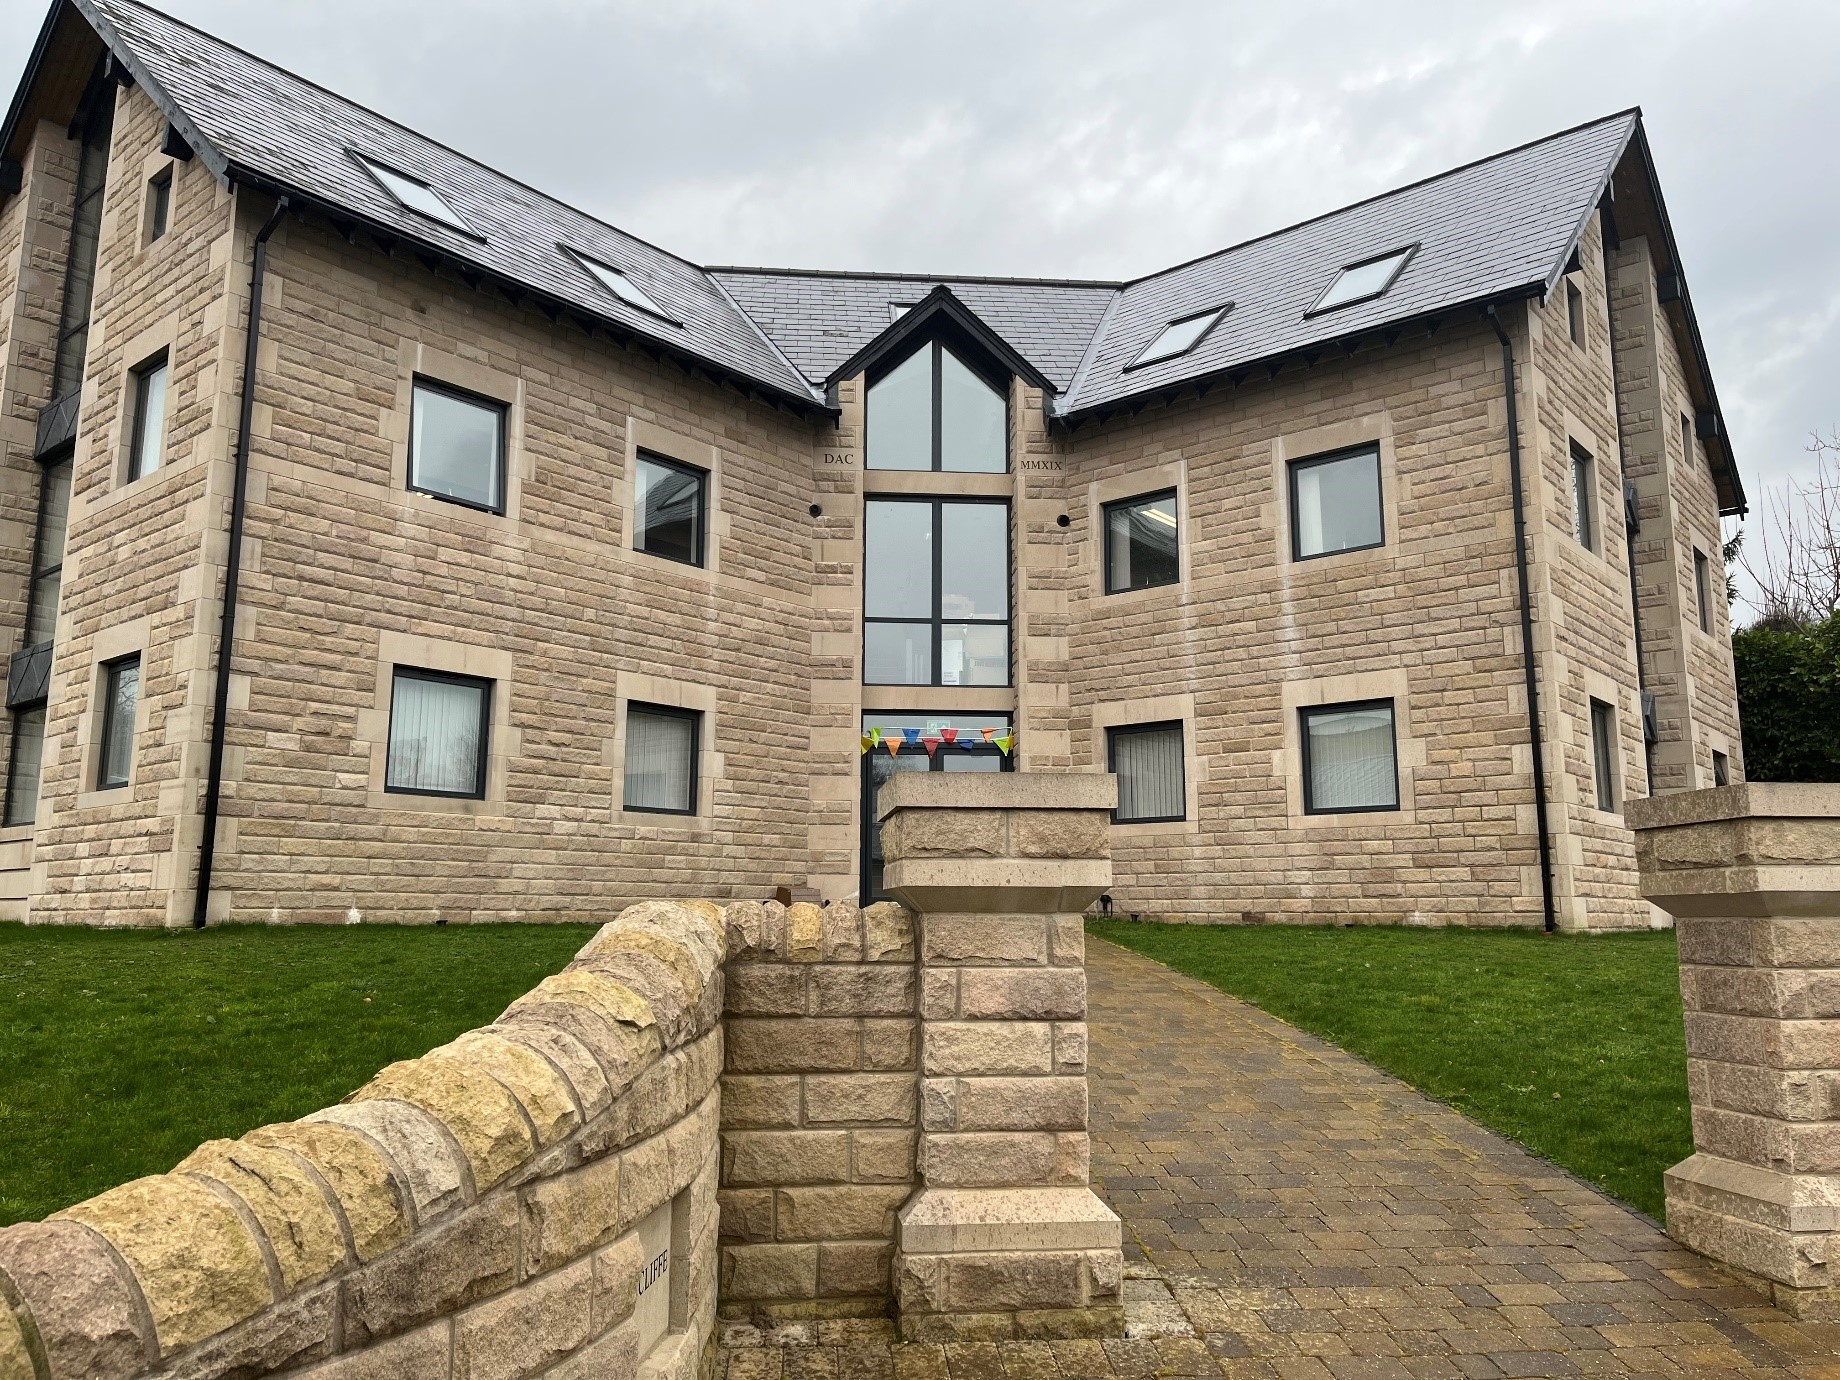 Derbyshire Healthcare opens new base in Bakewell